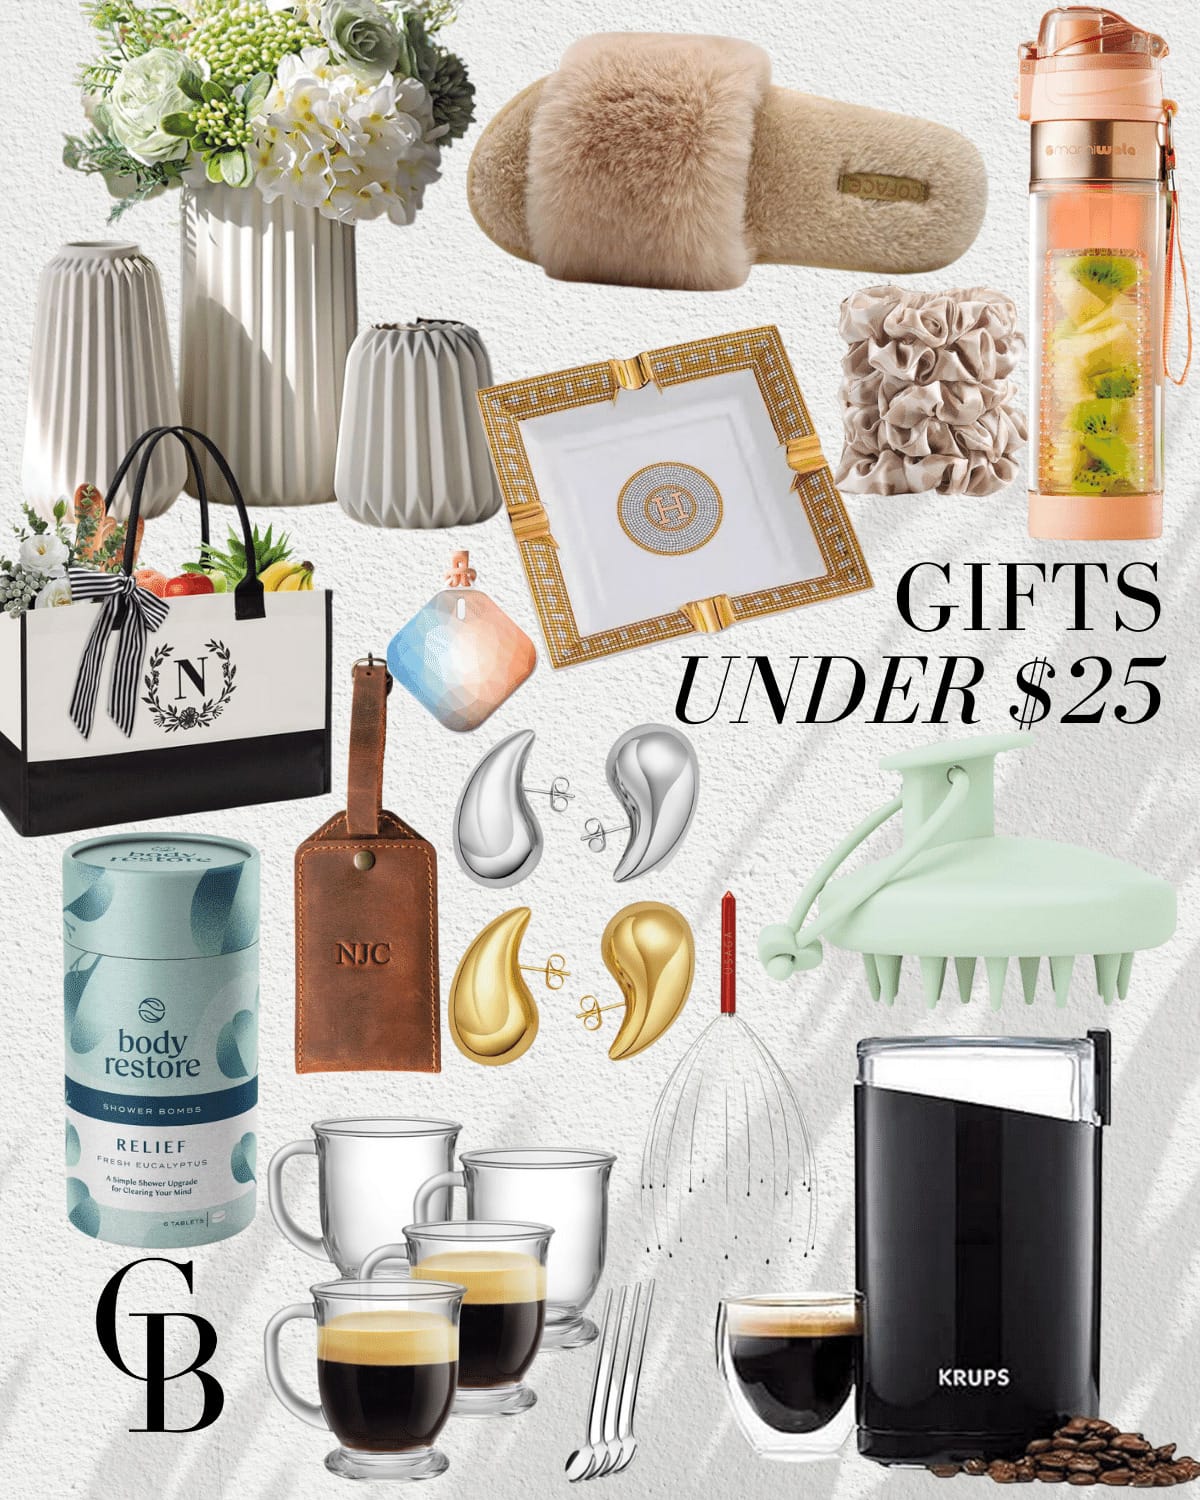 10 holiday gift guides everyone will love | #holiday #giftguide #christmas #giftideas #giftsunder25 #under25 #giftgiving #slippers #home #coffee #showersteamer #beauty